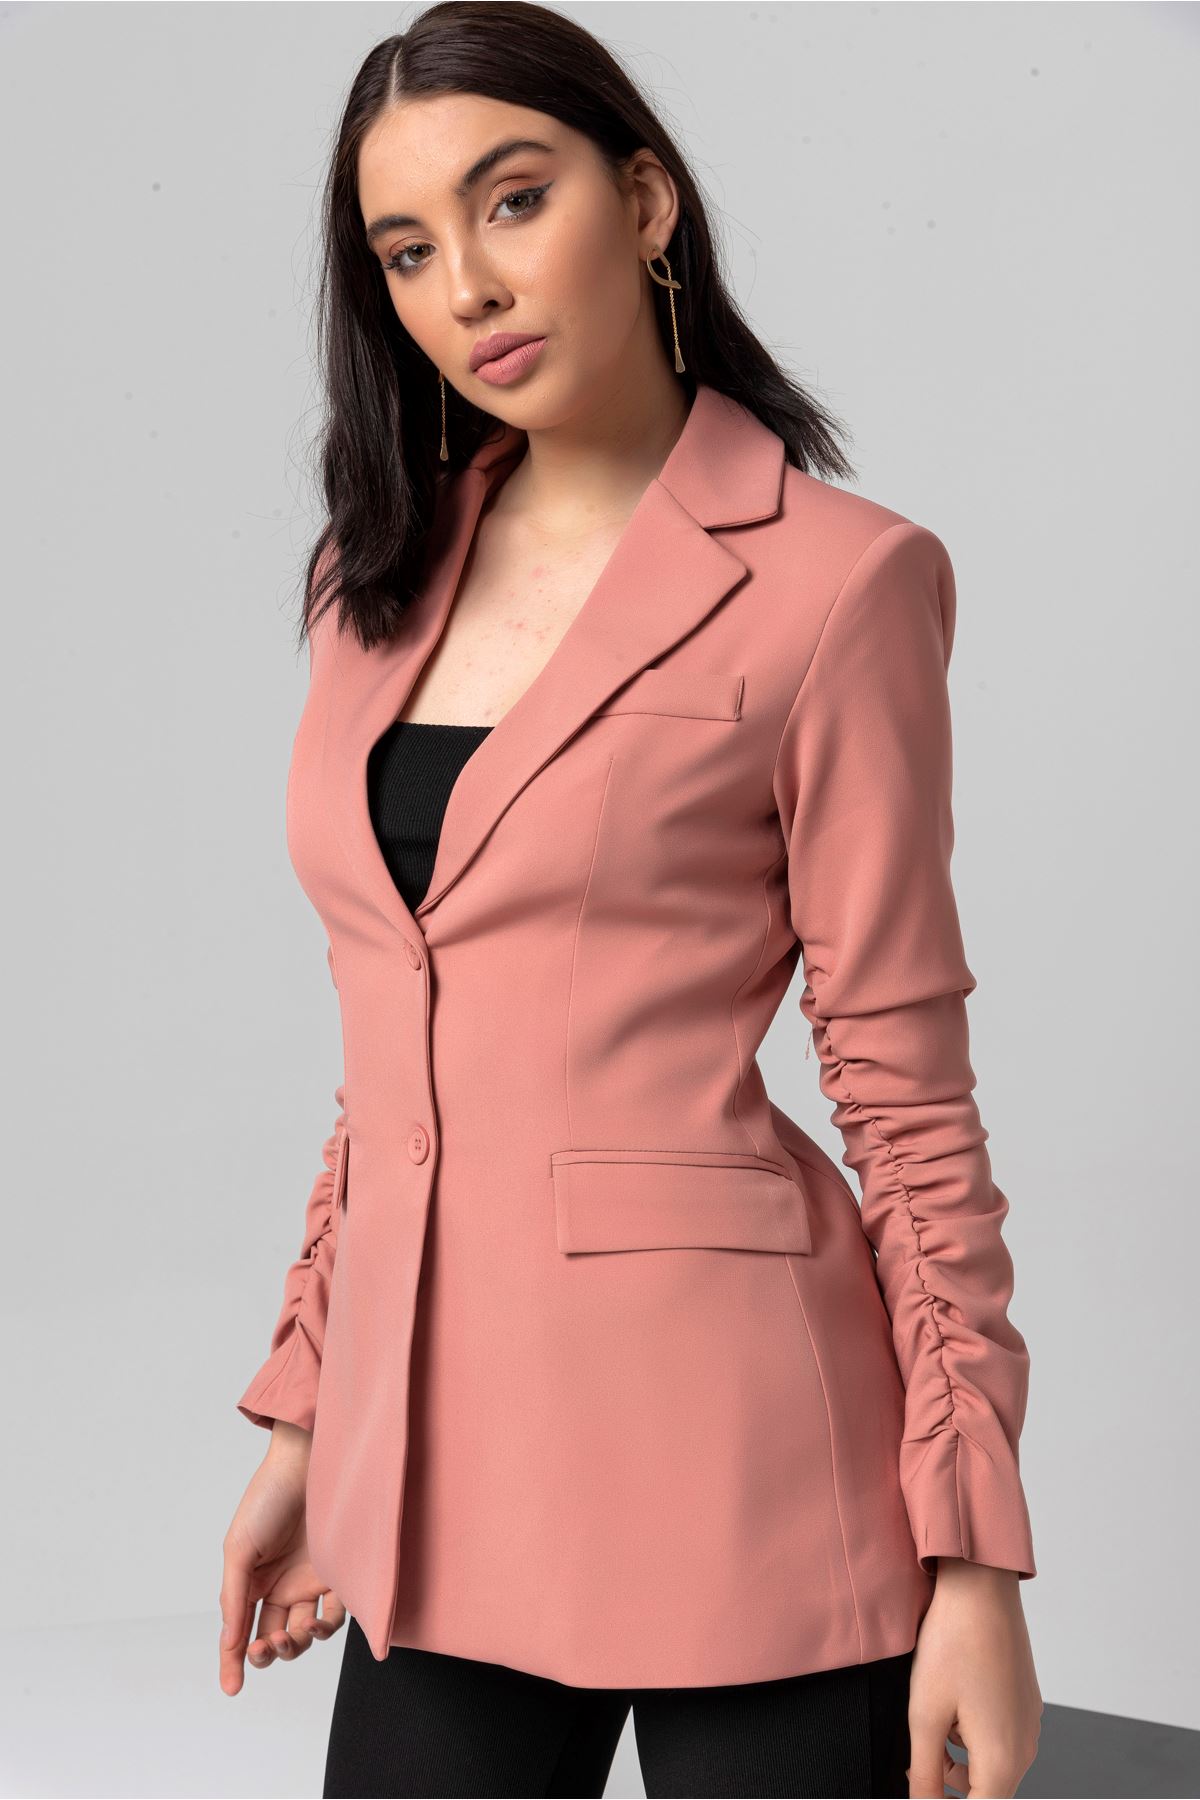 Polyester Fabric Hip Height Classical Shirred Sleeve Women Jacket - Light Pink